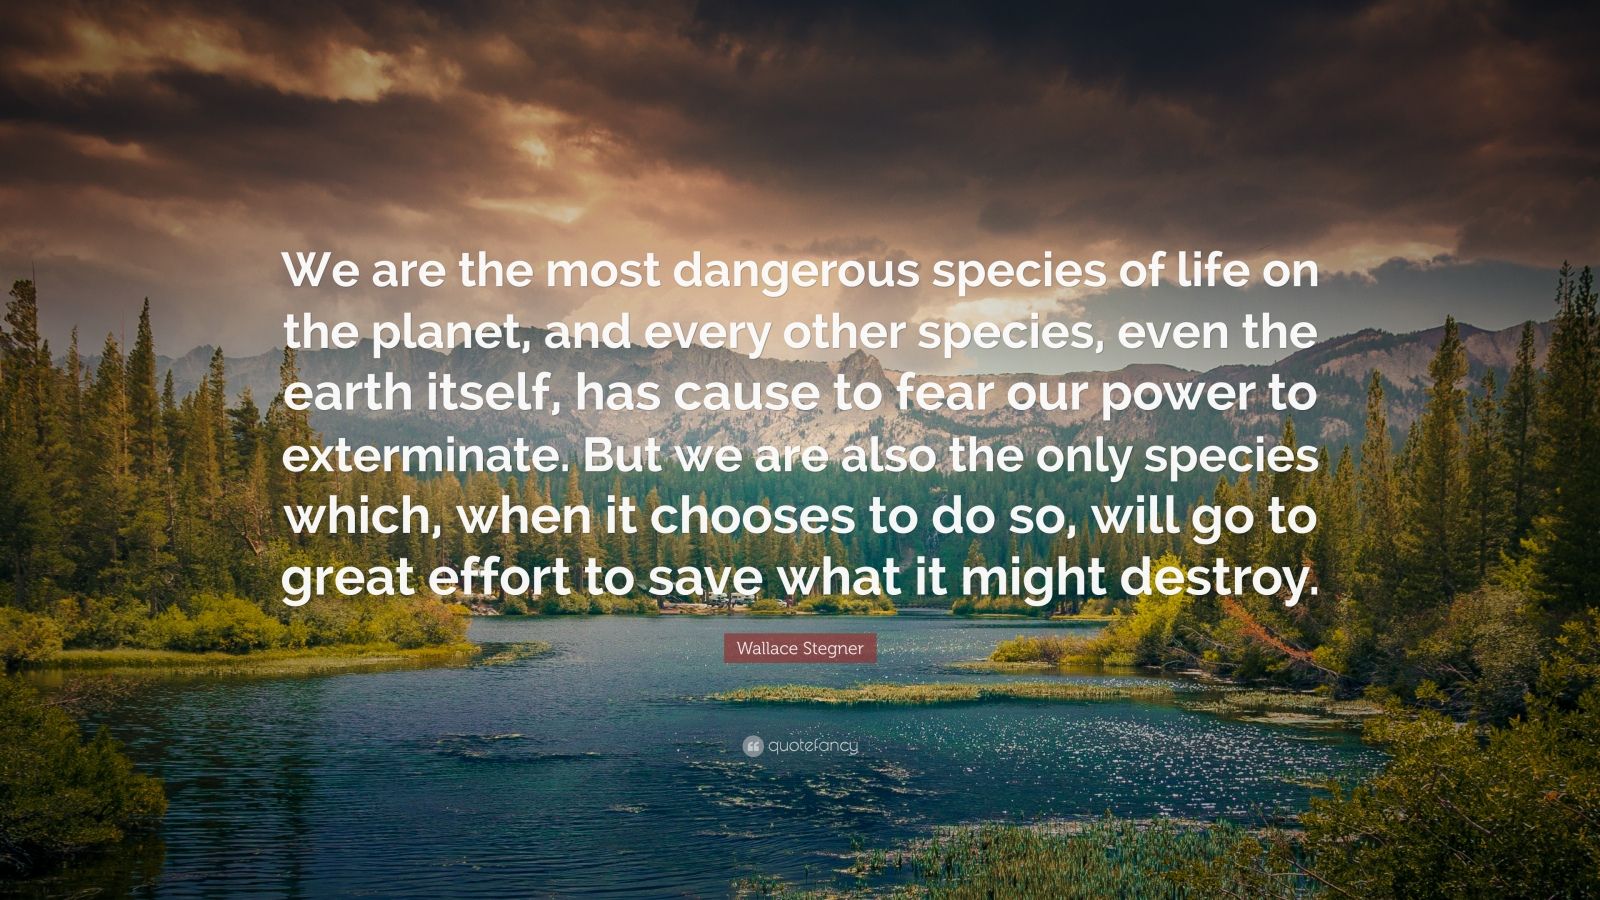 Wallace Stegner Quote: “We are the most dangerous species of life on ...